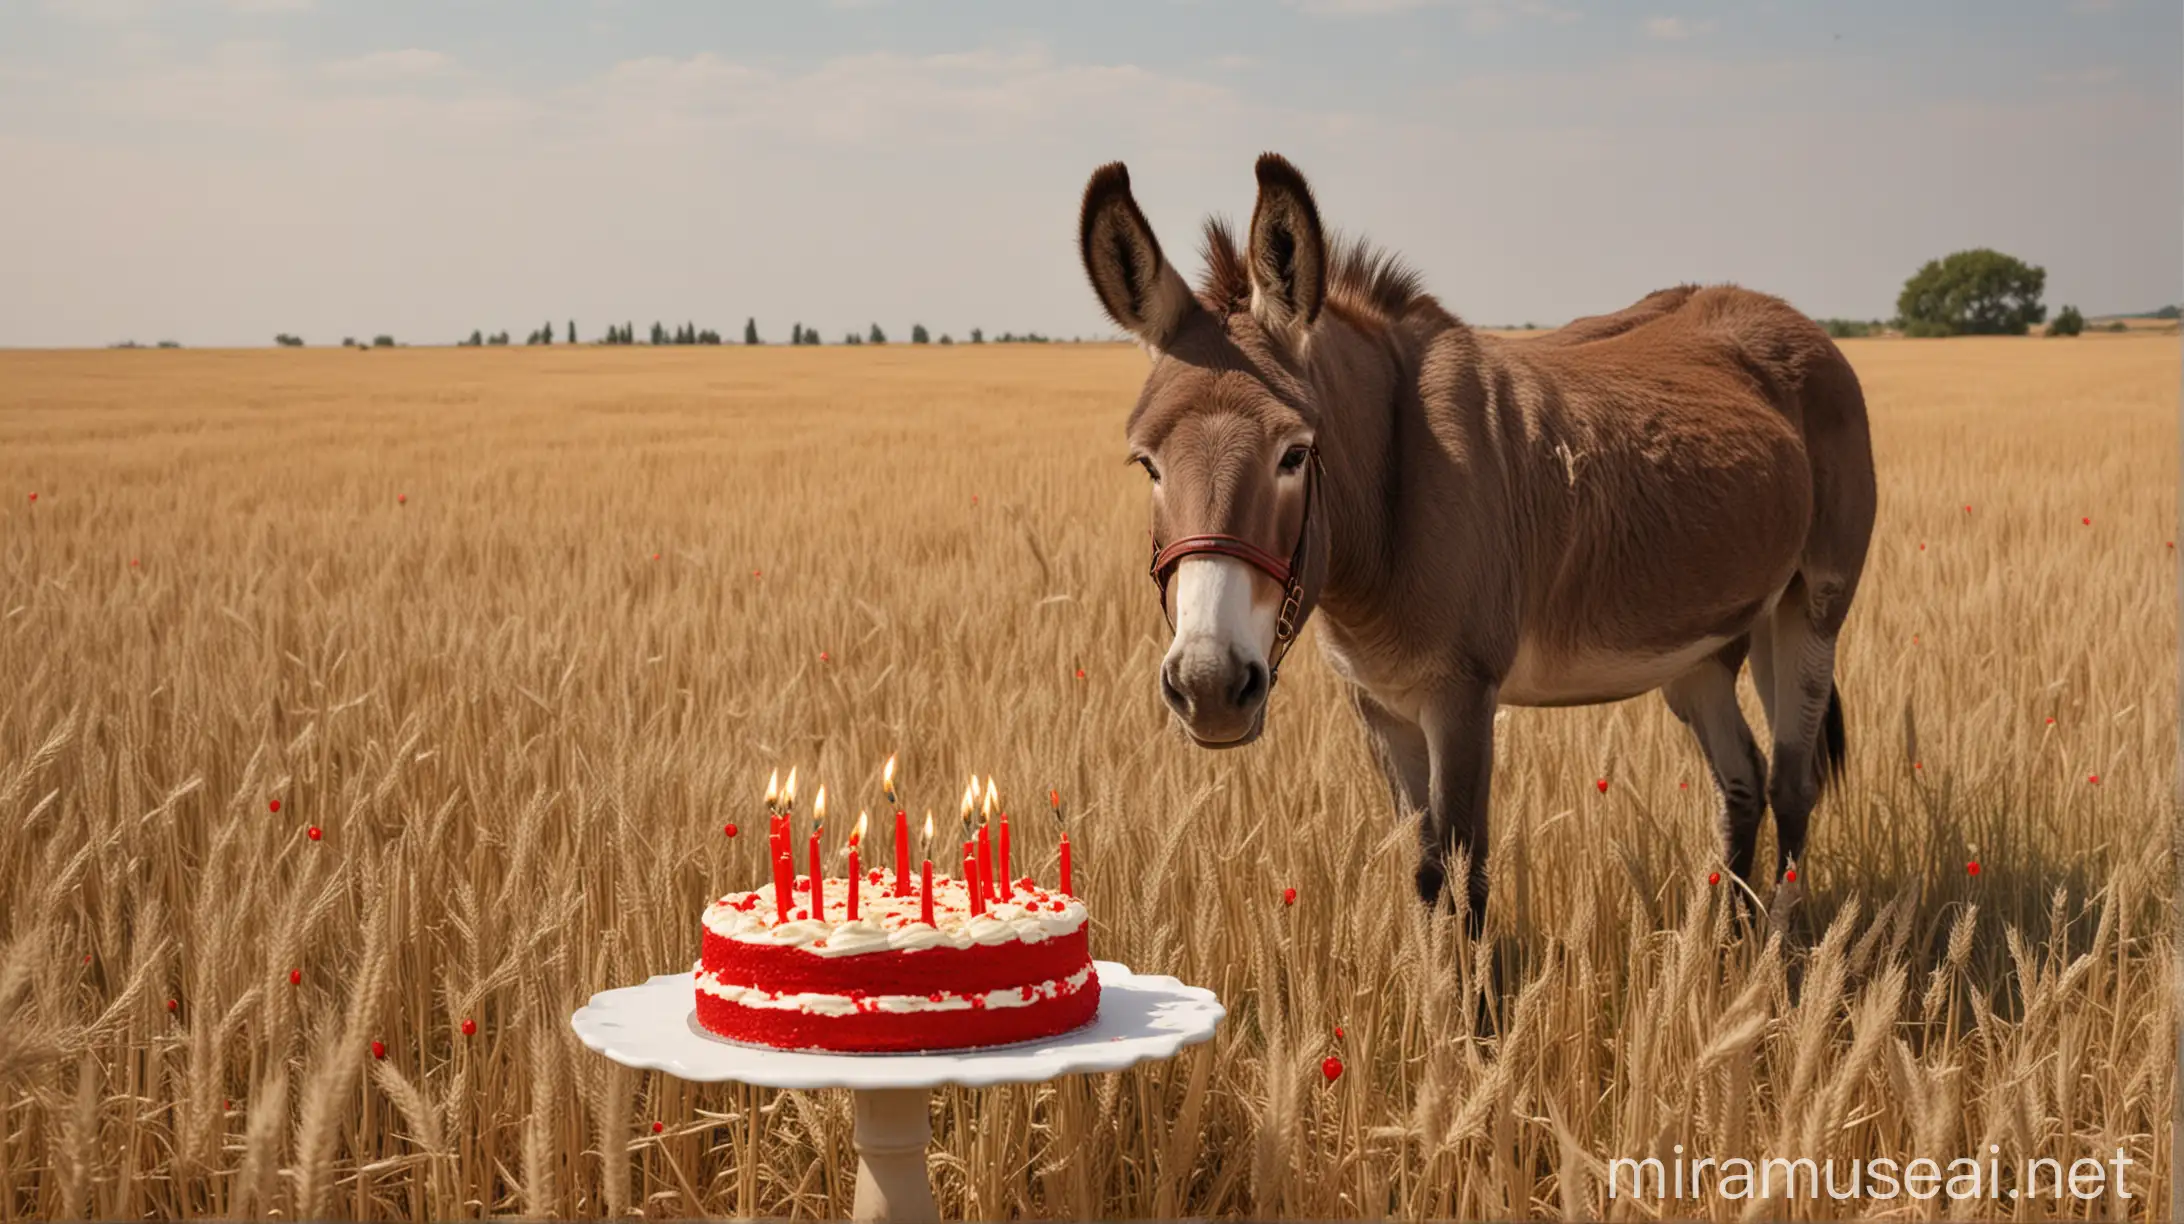 A picture of a donkey in a field of wheat where the wheat is red. And the donkey is blowing out the birthday candles on his own cake
Strangely, the color of wheat is red